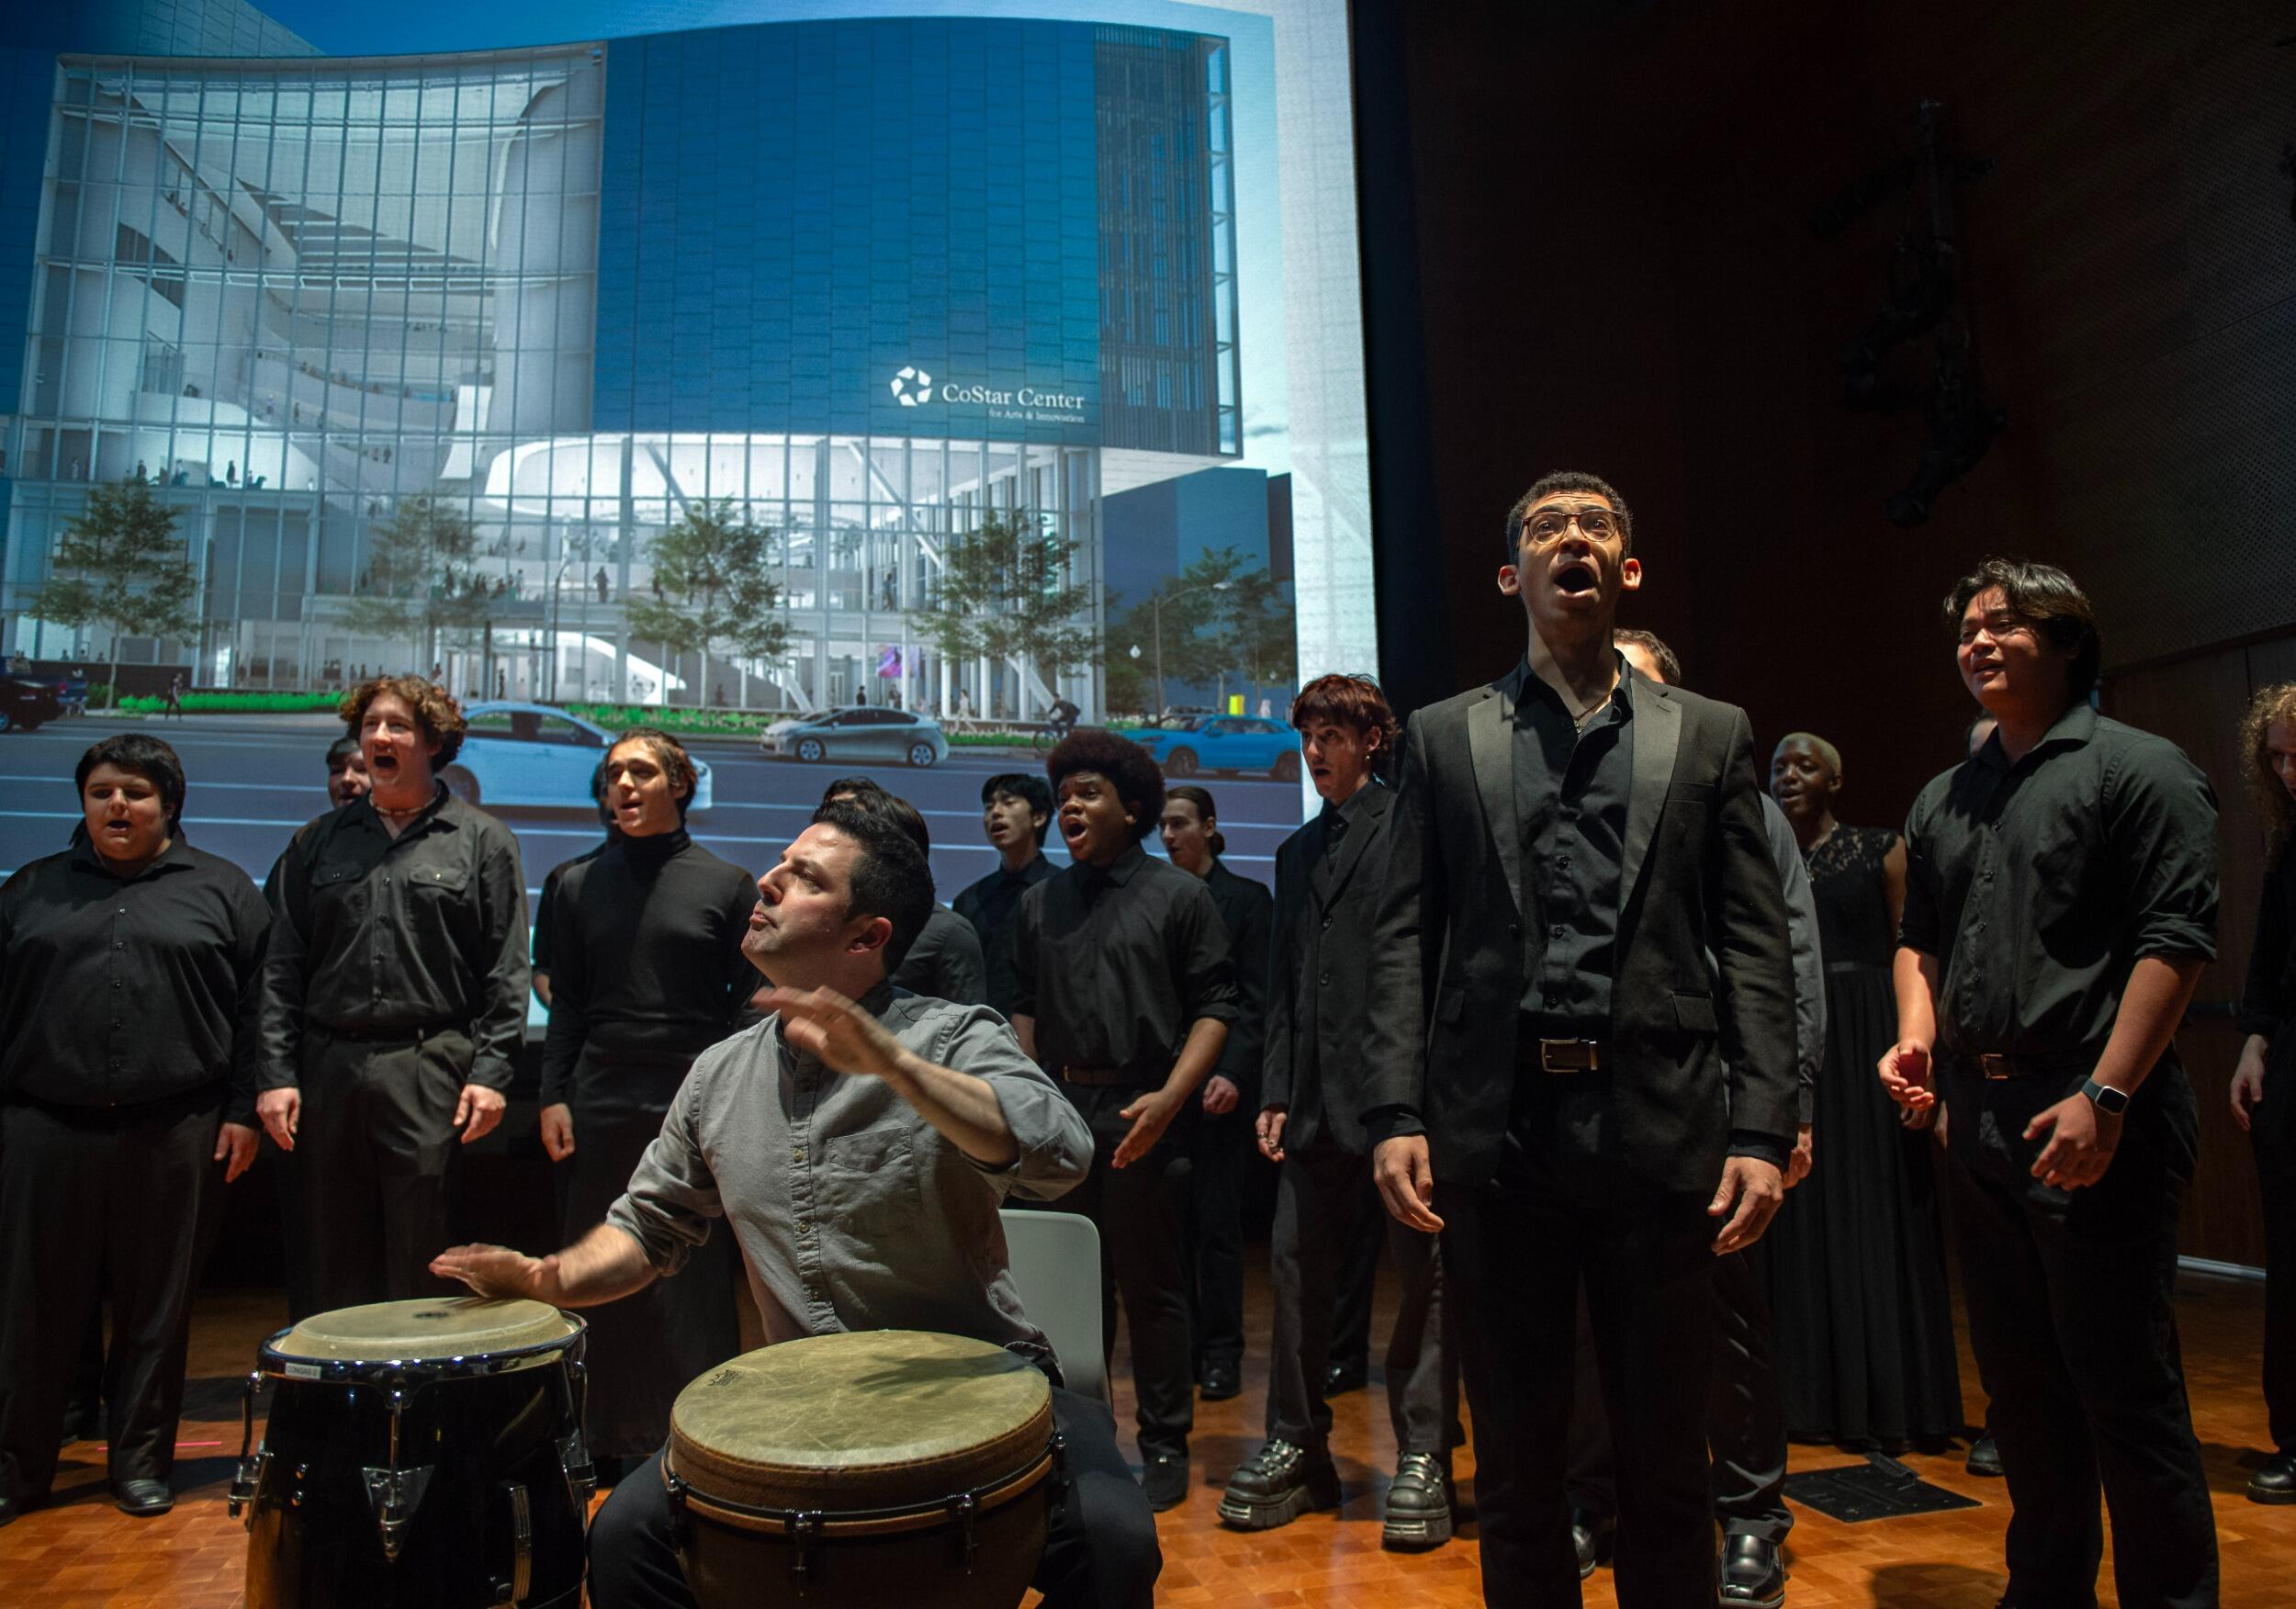 A photo of a group of people wearing all black singing while a man sitting plays the bongo drums in front of them. 